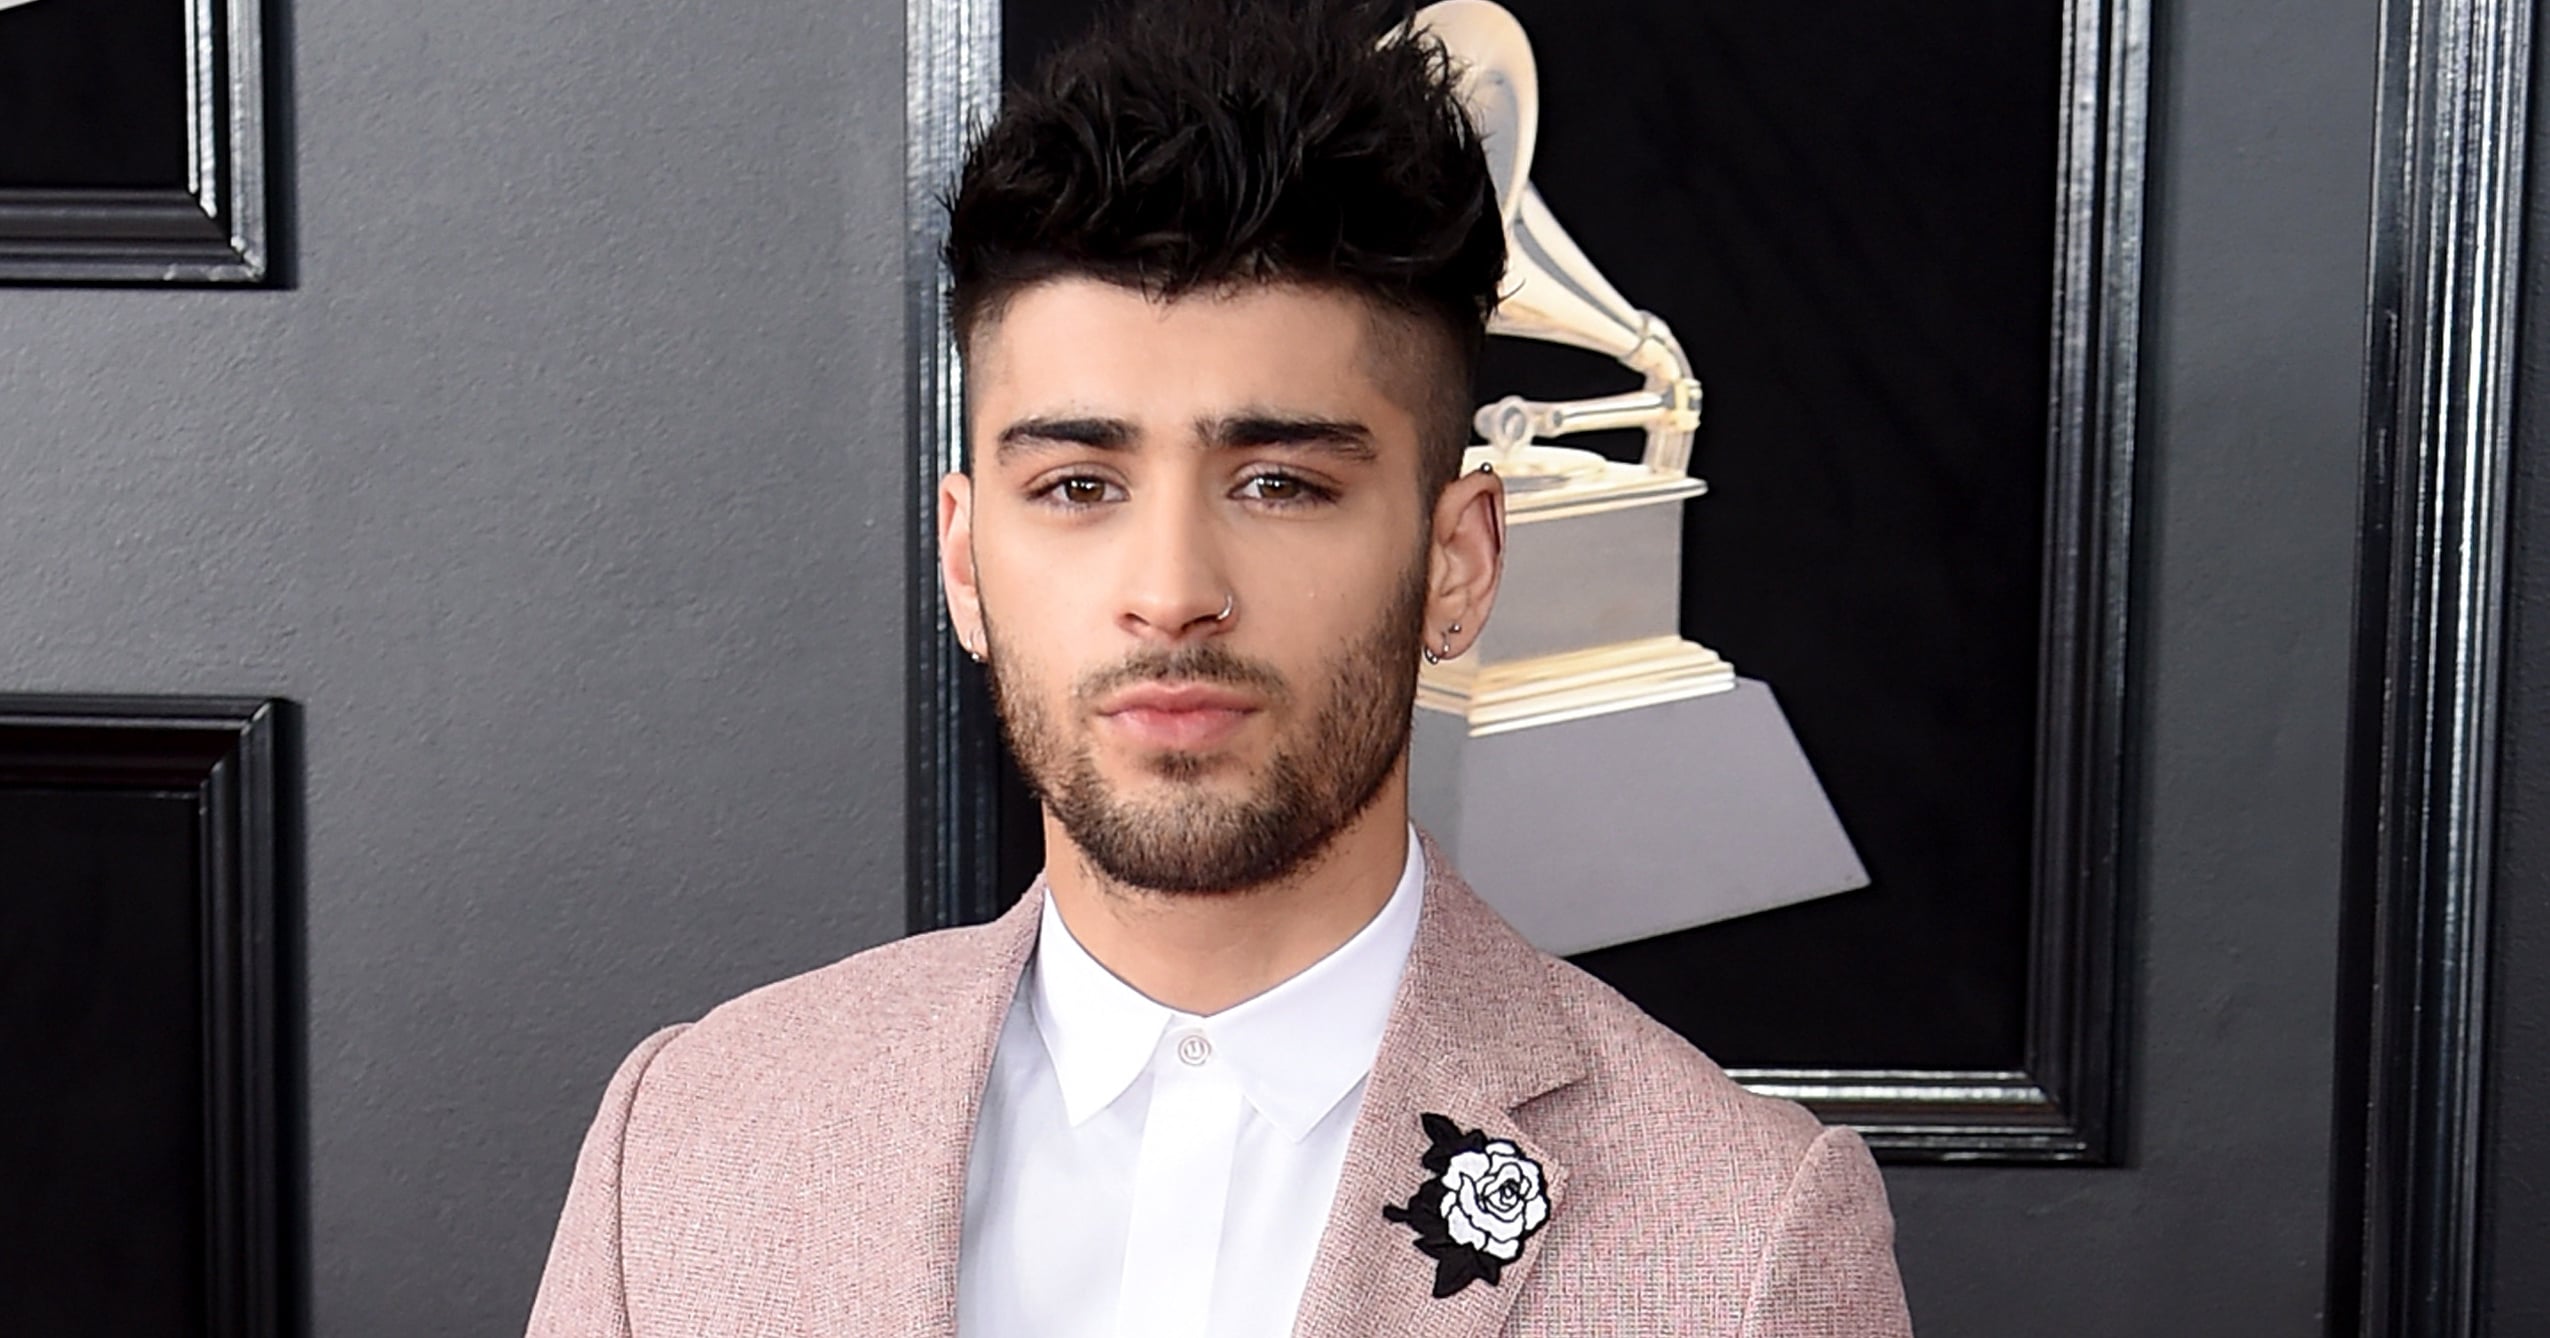 Zayn Malik Was “Sick of” One Direction When He Quit, But He Feels Differently Now